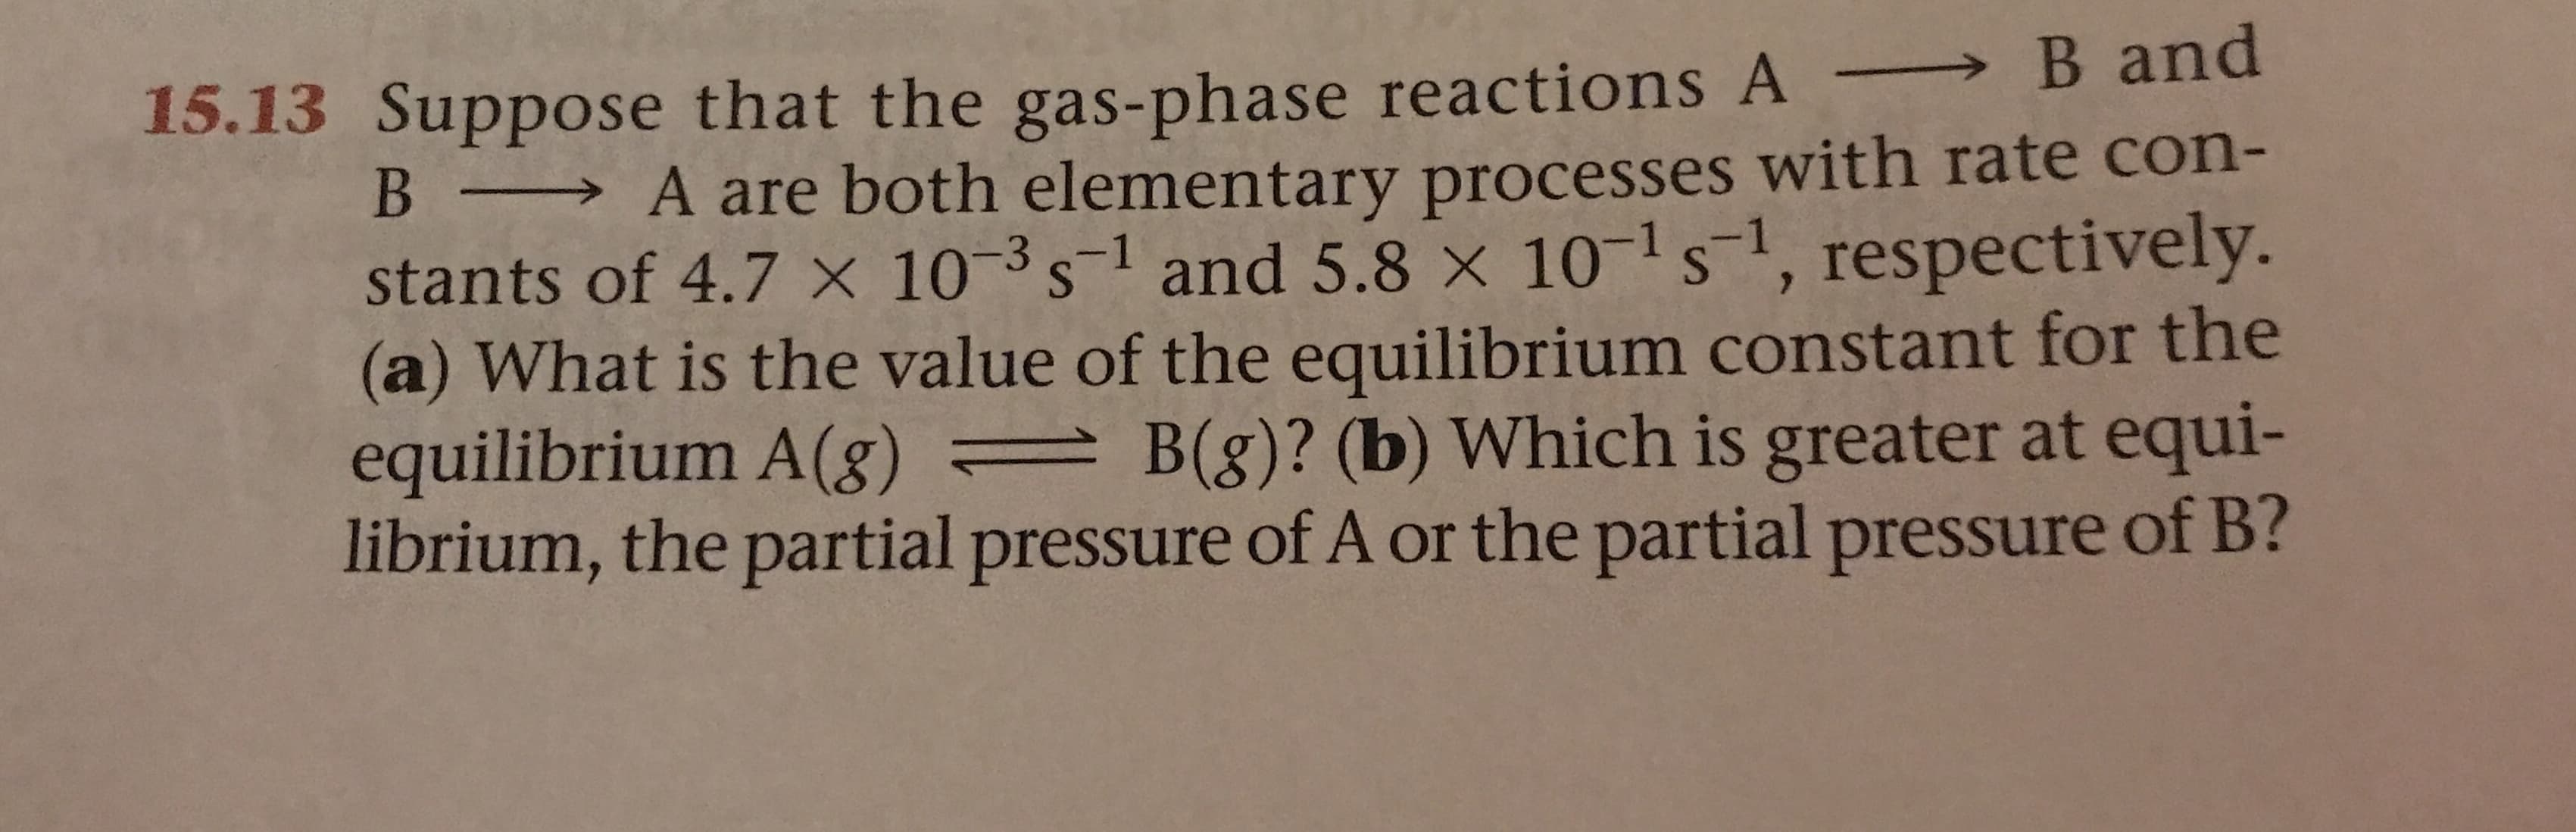 15.13 Suppose that the gas-phase reactions A B and
A are both elementary processes with rate con-
stants of 4.7 x 103s1 and 5.8 x 101 s, respectively.
(a) What is the value of the equilibrium constant for the
equilibrium A (g) =B(g)? (b) Which is greater at equi-
librium, the partial pressure of A or the partial pressure of B?
B
